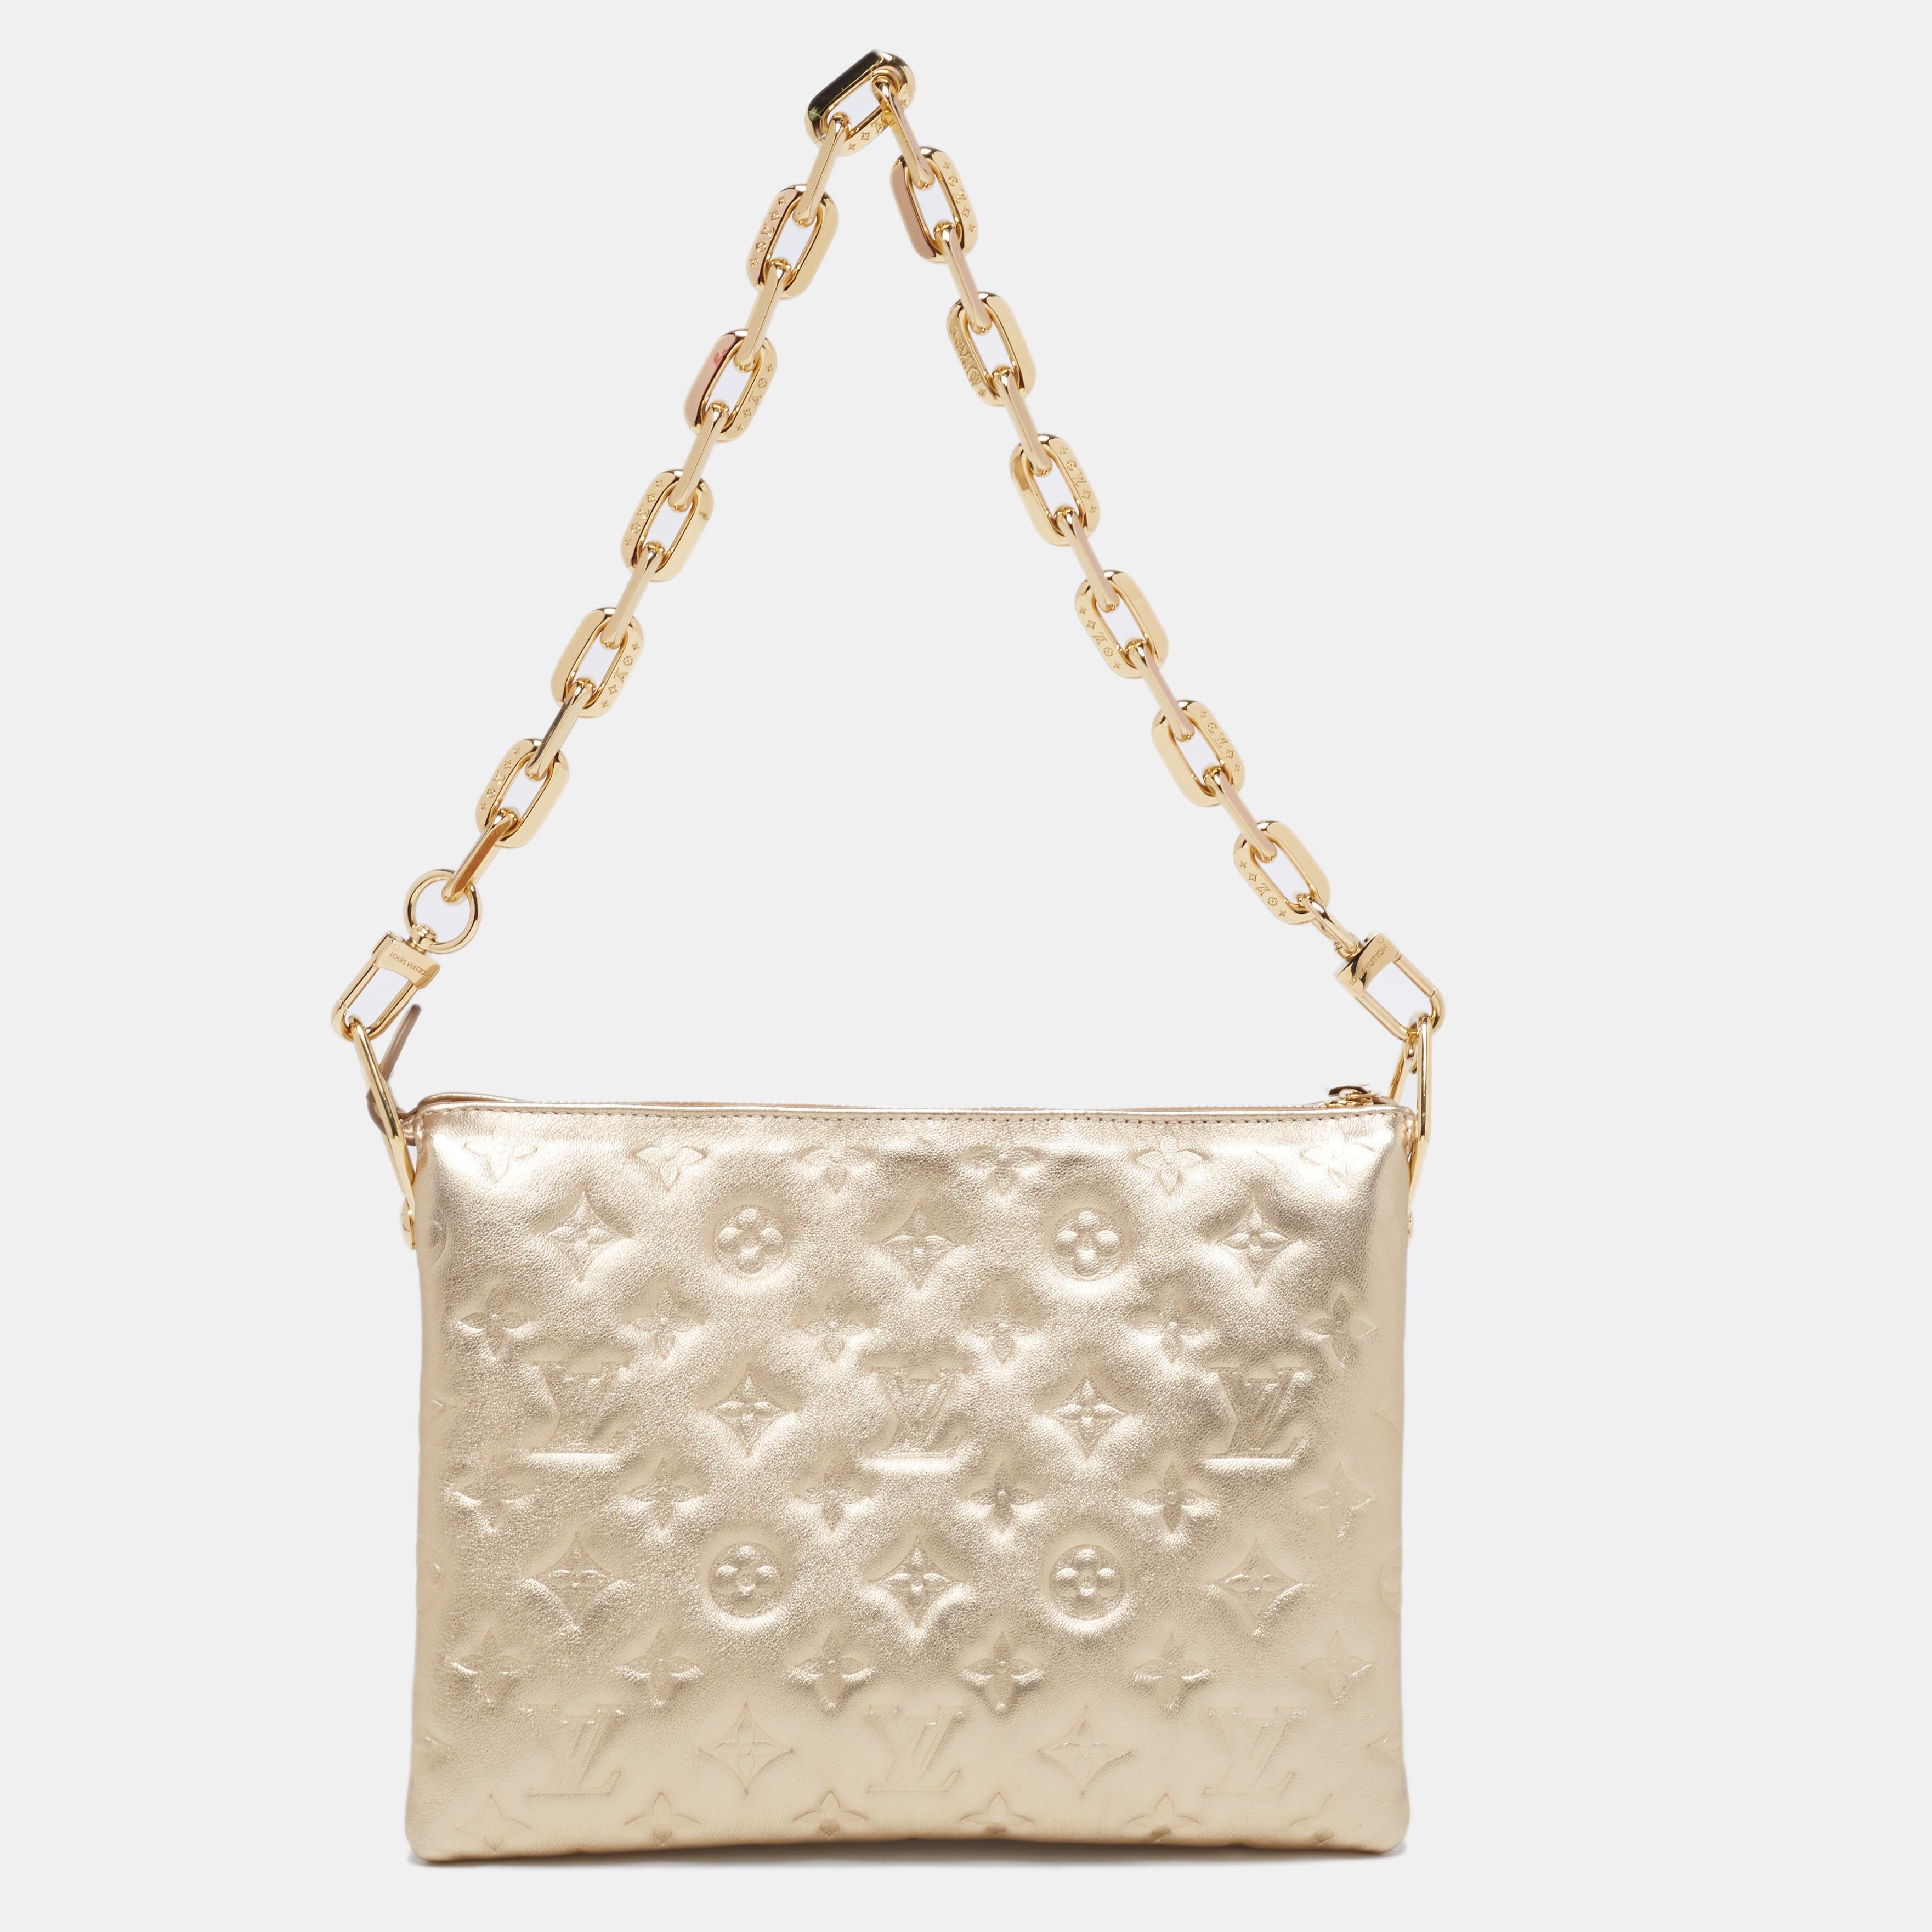 Made skillfully from monogram embossed leather, this Louis Vuitton bag is super-chic and versatile. The stunning gold-hued bag comes with a chain and shoulder strap and flaunts a structured shape. It is the perfect evening accessory to add to your